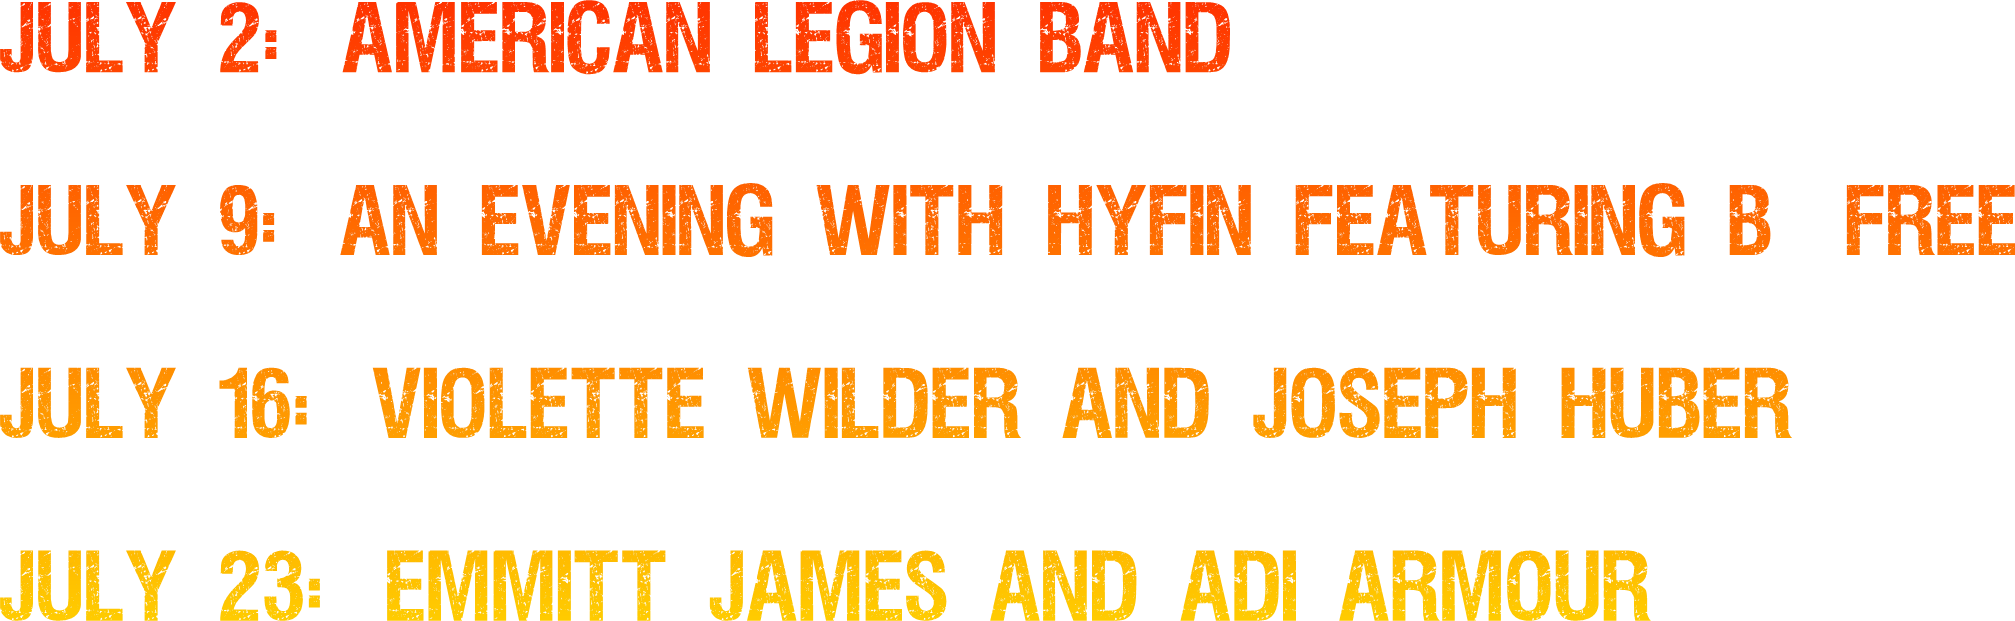 July 2:  American Legion Band

July 9:  An Evening with HYFIN featuring B-Free

July 16:  Violette Wilder and Joseph Huber

July 23:  Emmitt James and Adi Armour